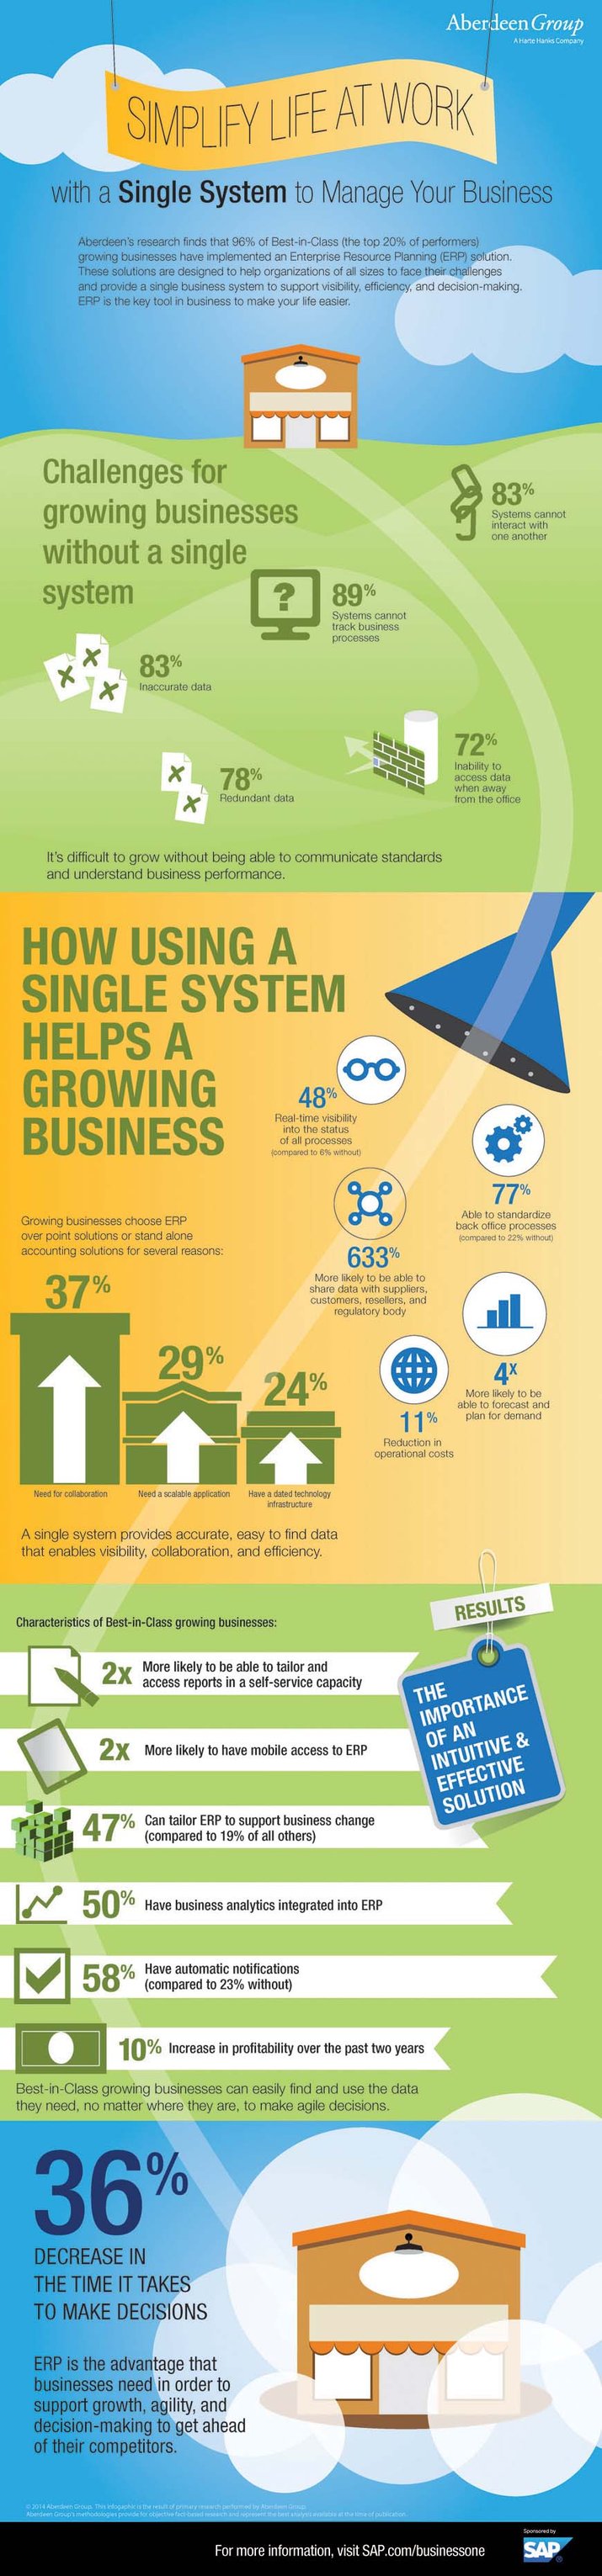 Infographic - ERP makes life easier